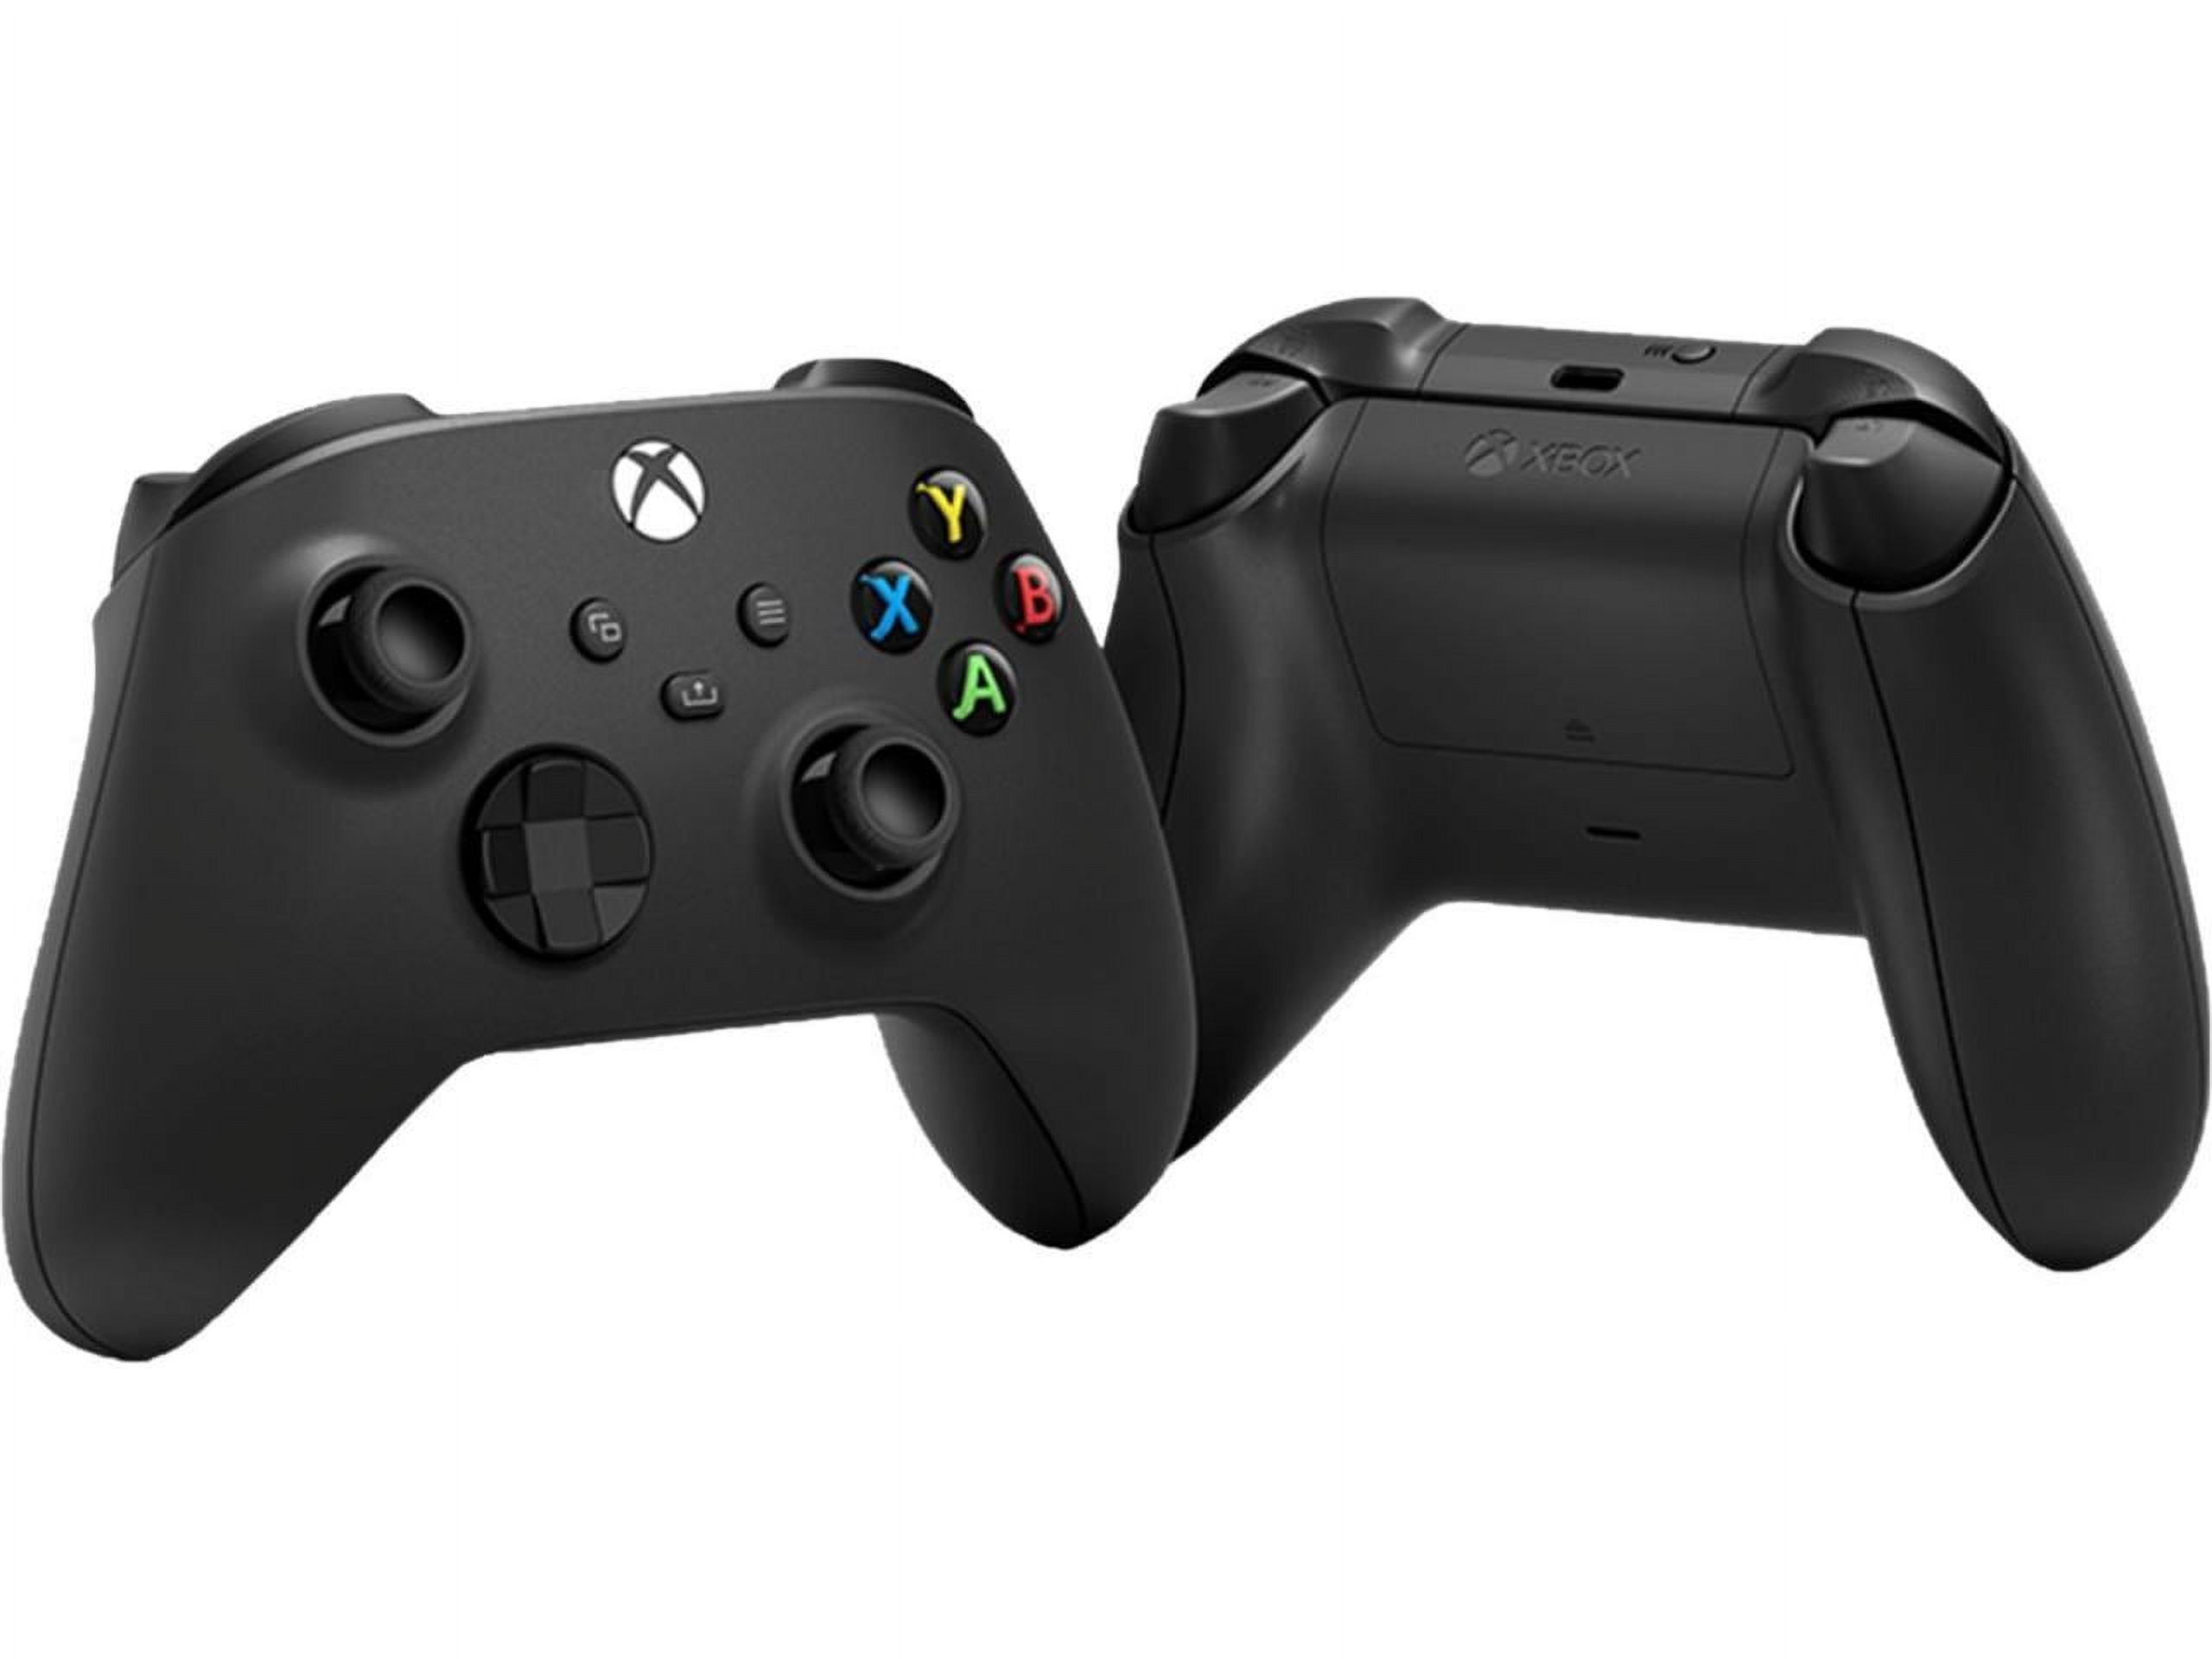 Microsoft Xbox Wireless Controller - Carbon Black - image 5 of 5